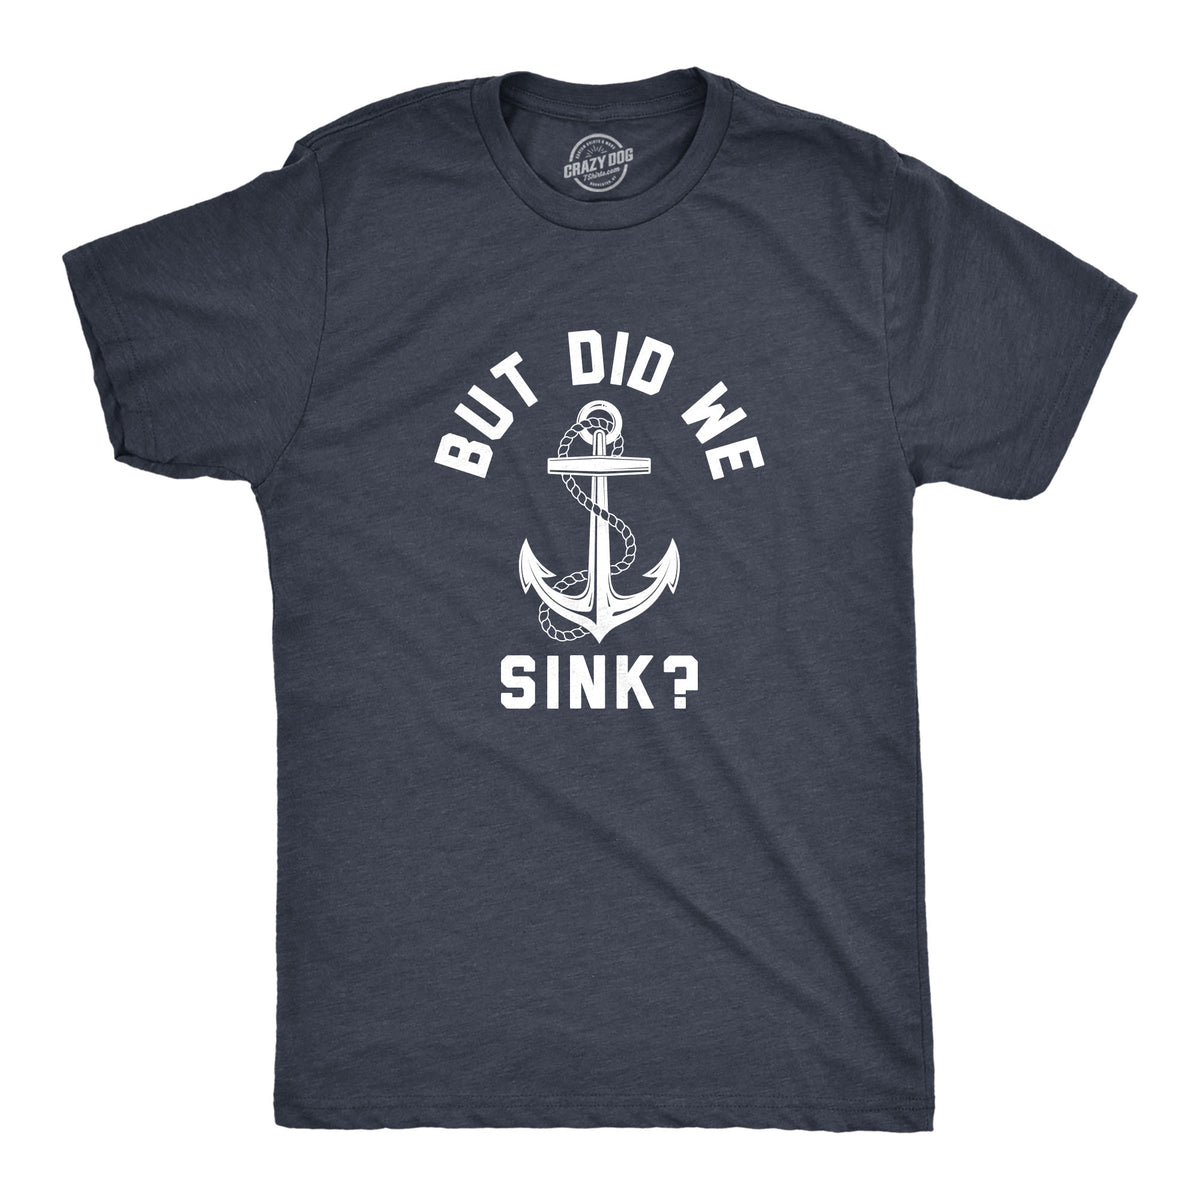 Funny Heather Navy - SINK But Did We Sink Mens T Shirt Nerdy Sarcastic Tee